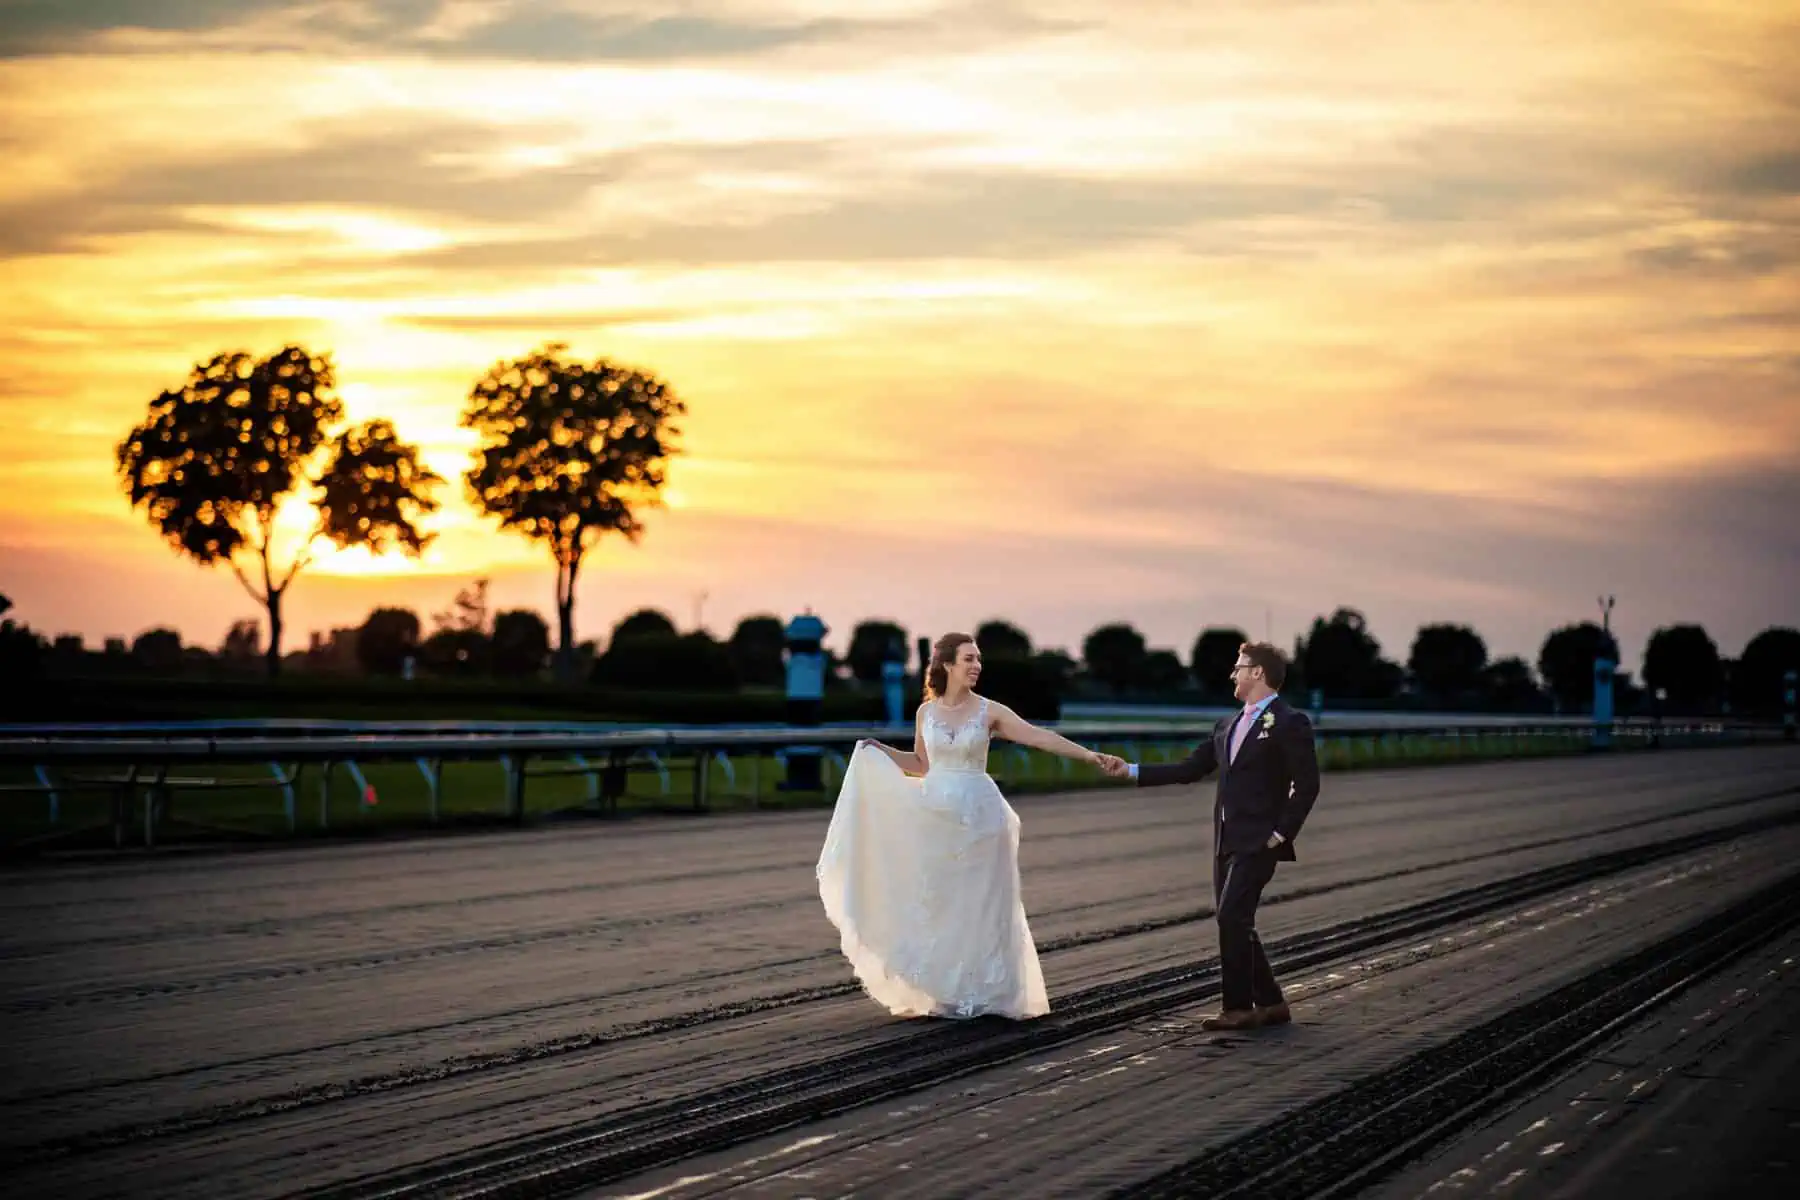 A bride and groom standing on a track at sunset.